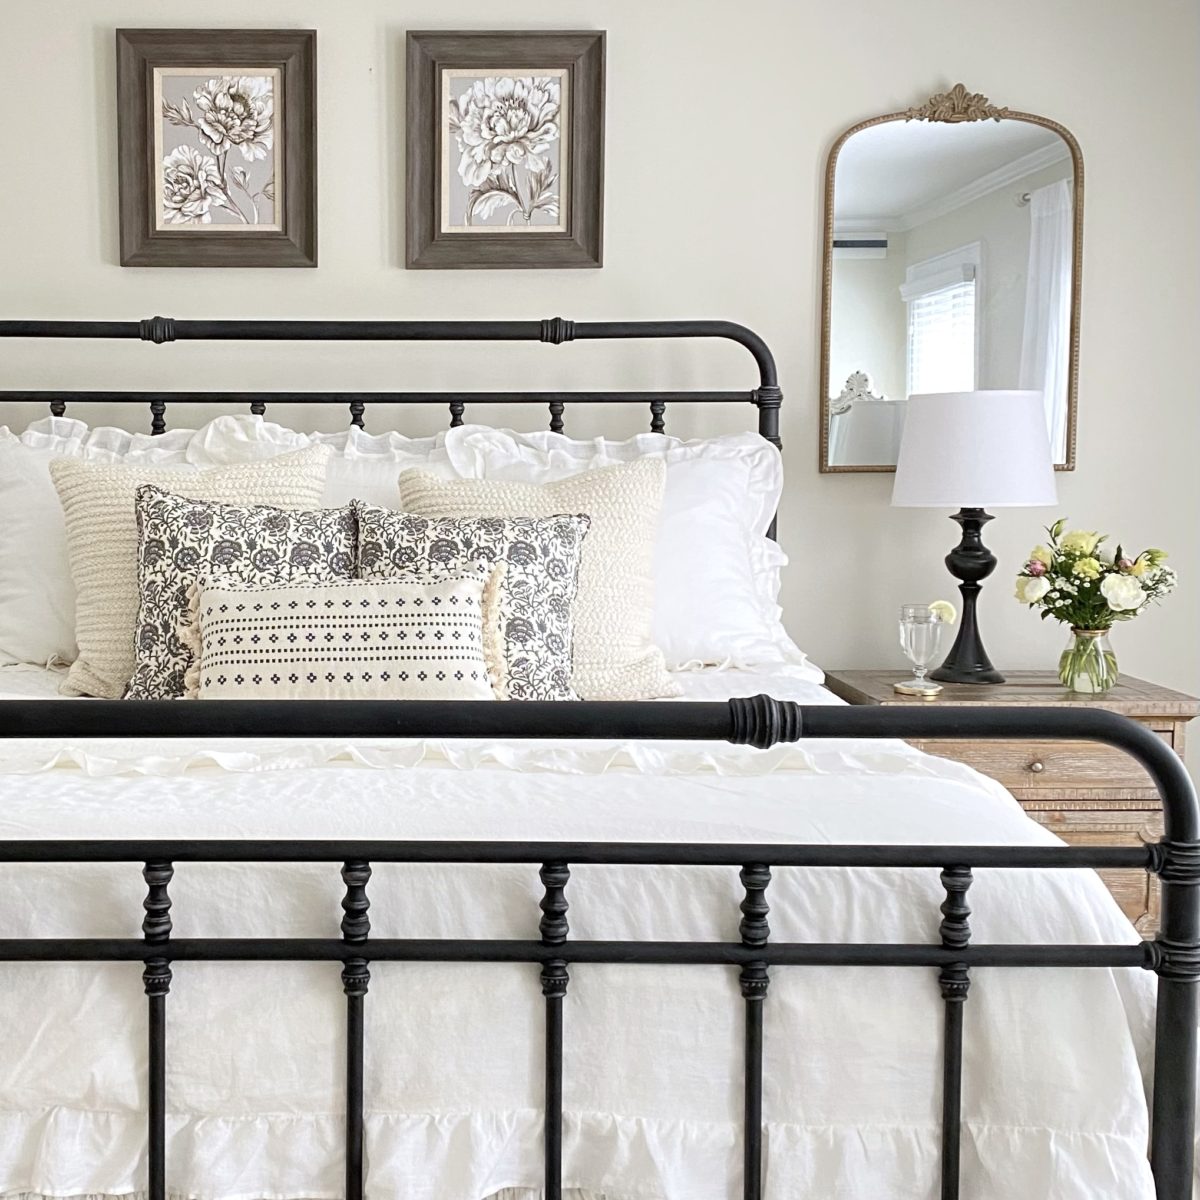 Simple summer bedroom with iron bed, white bedding, floral prints, and a mirror.